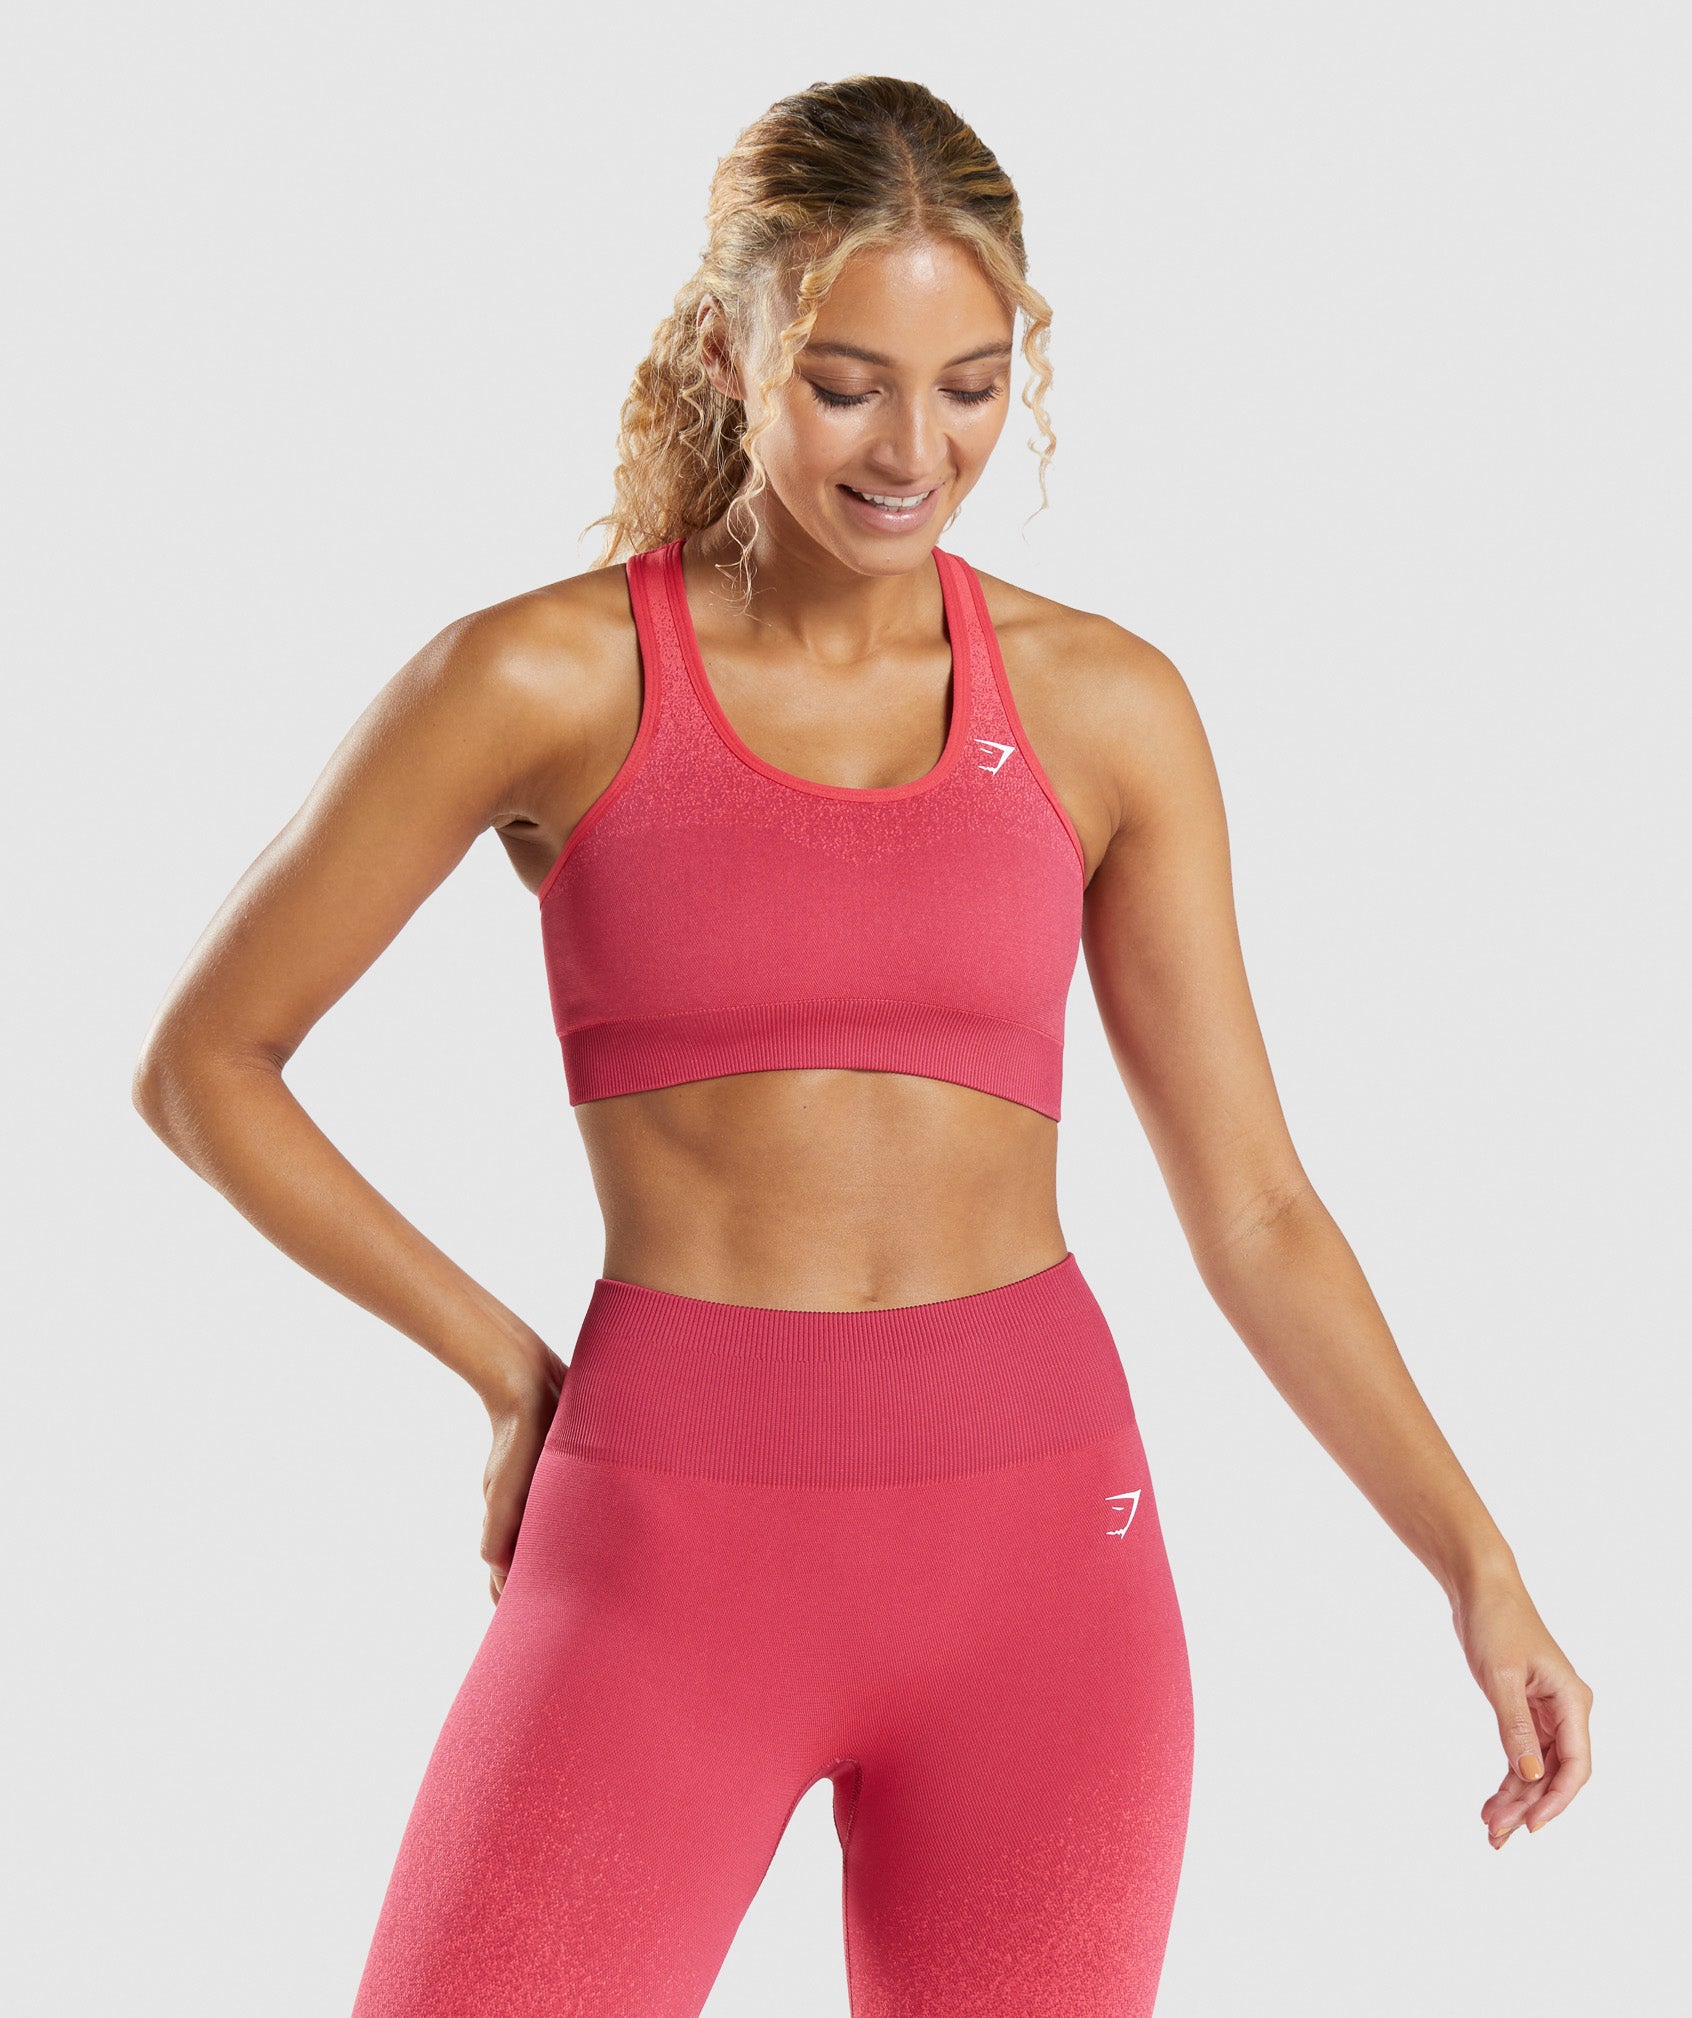 Pink1 Sports bra V3RP19 MC04Y Guess Athleisure, Women Sportswear Pink1 Sports  bra V3RP19 MC04Y Guess Athleisure, Women Sportswear